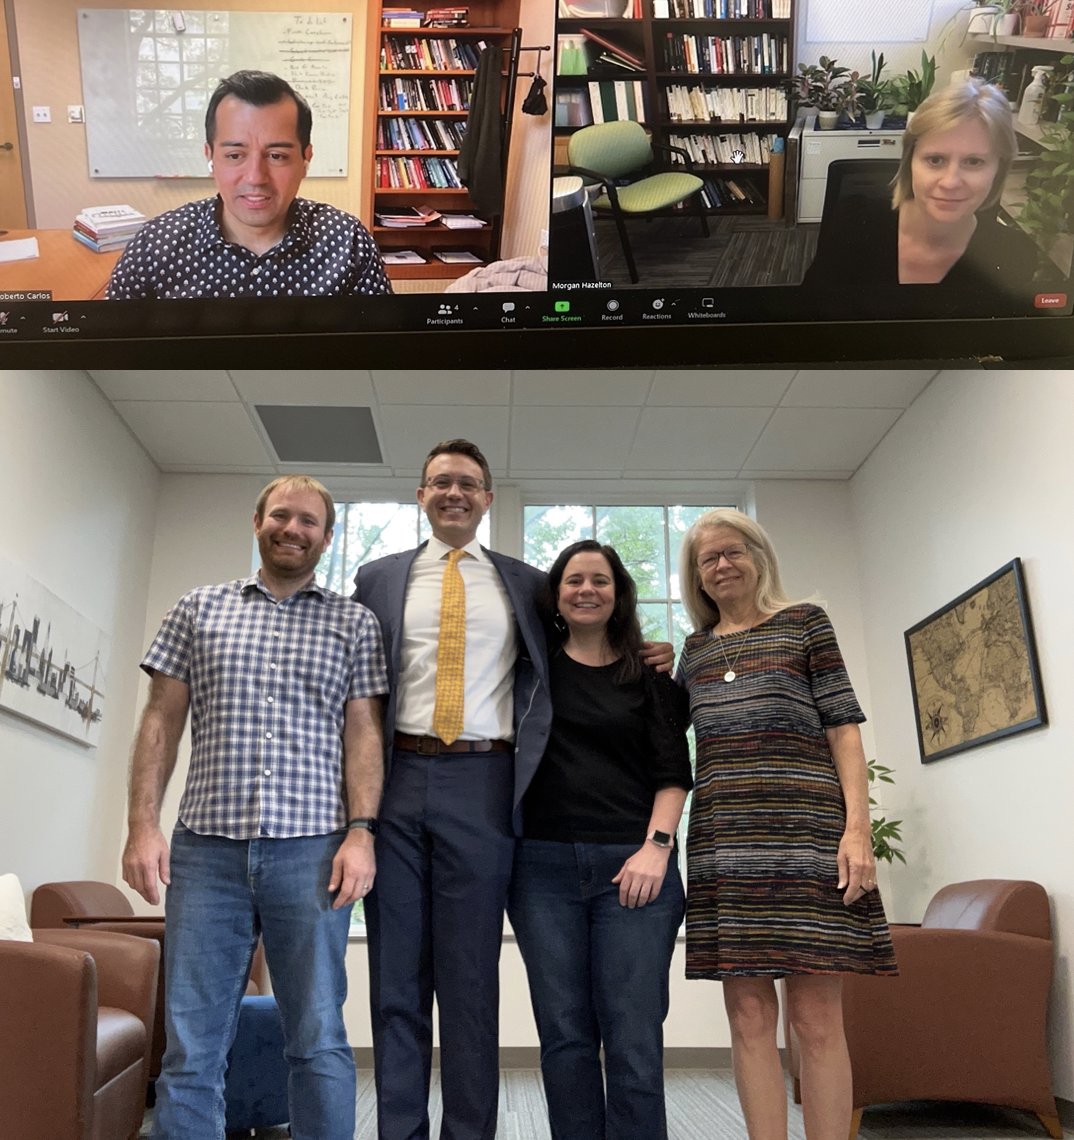 He is now Dr. @mebaker_law! Congrats to Matt on today's successful Ph.D. dissertation defense and his wonderful graduate career at @PolsUga @universityofga! Very proud! (w/ @gsheag, @HazeltonPhDJD, @robertfcarlos, & Susan Haire)